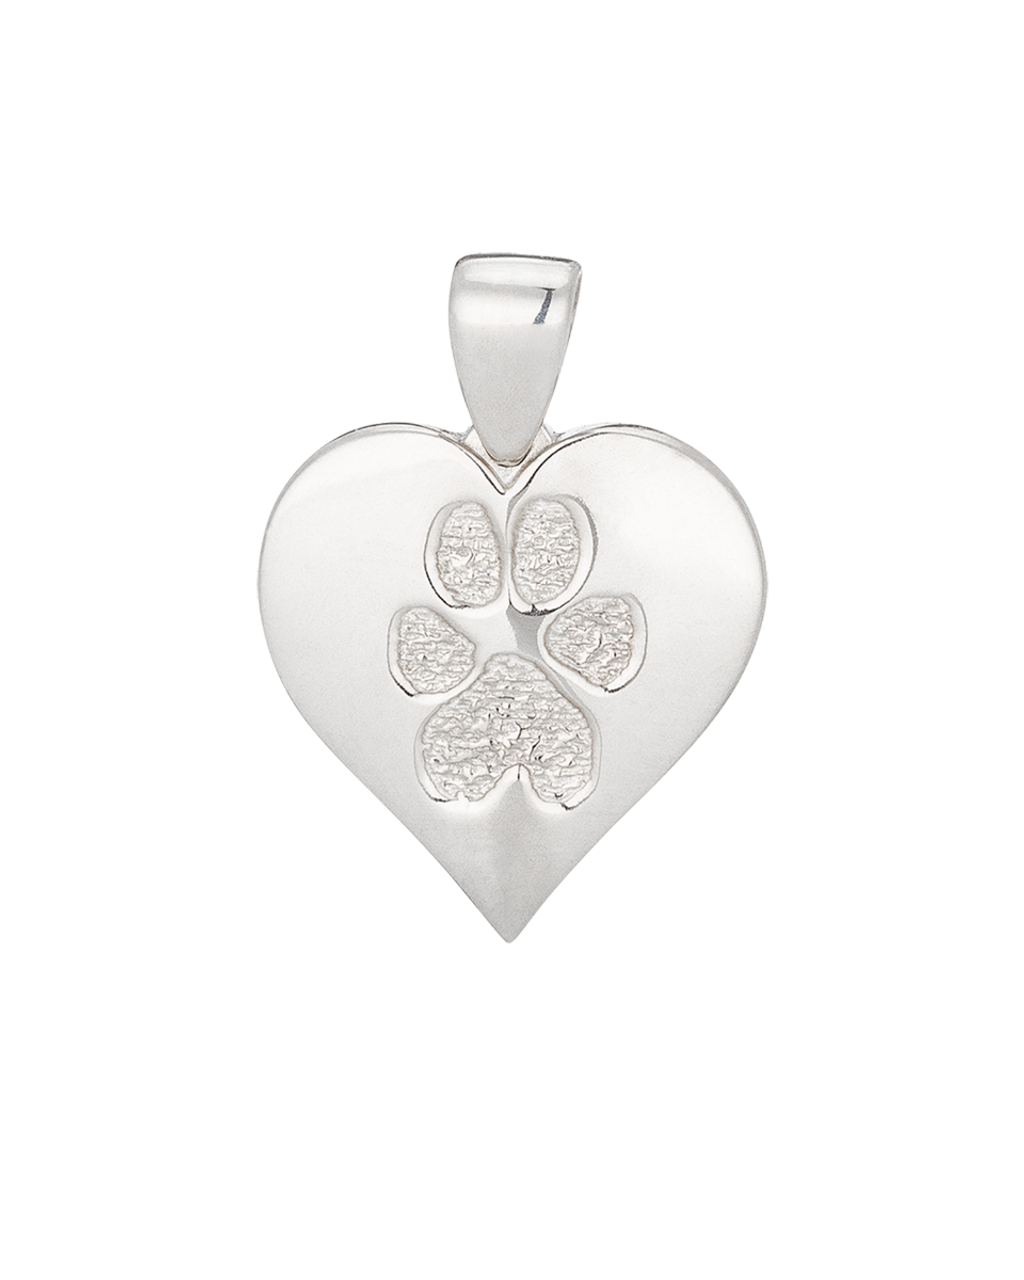 Single HeartFelt Charm Buddie in White Gold with Paw Print